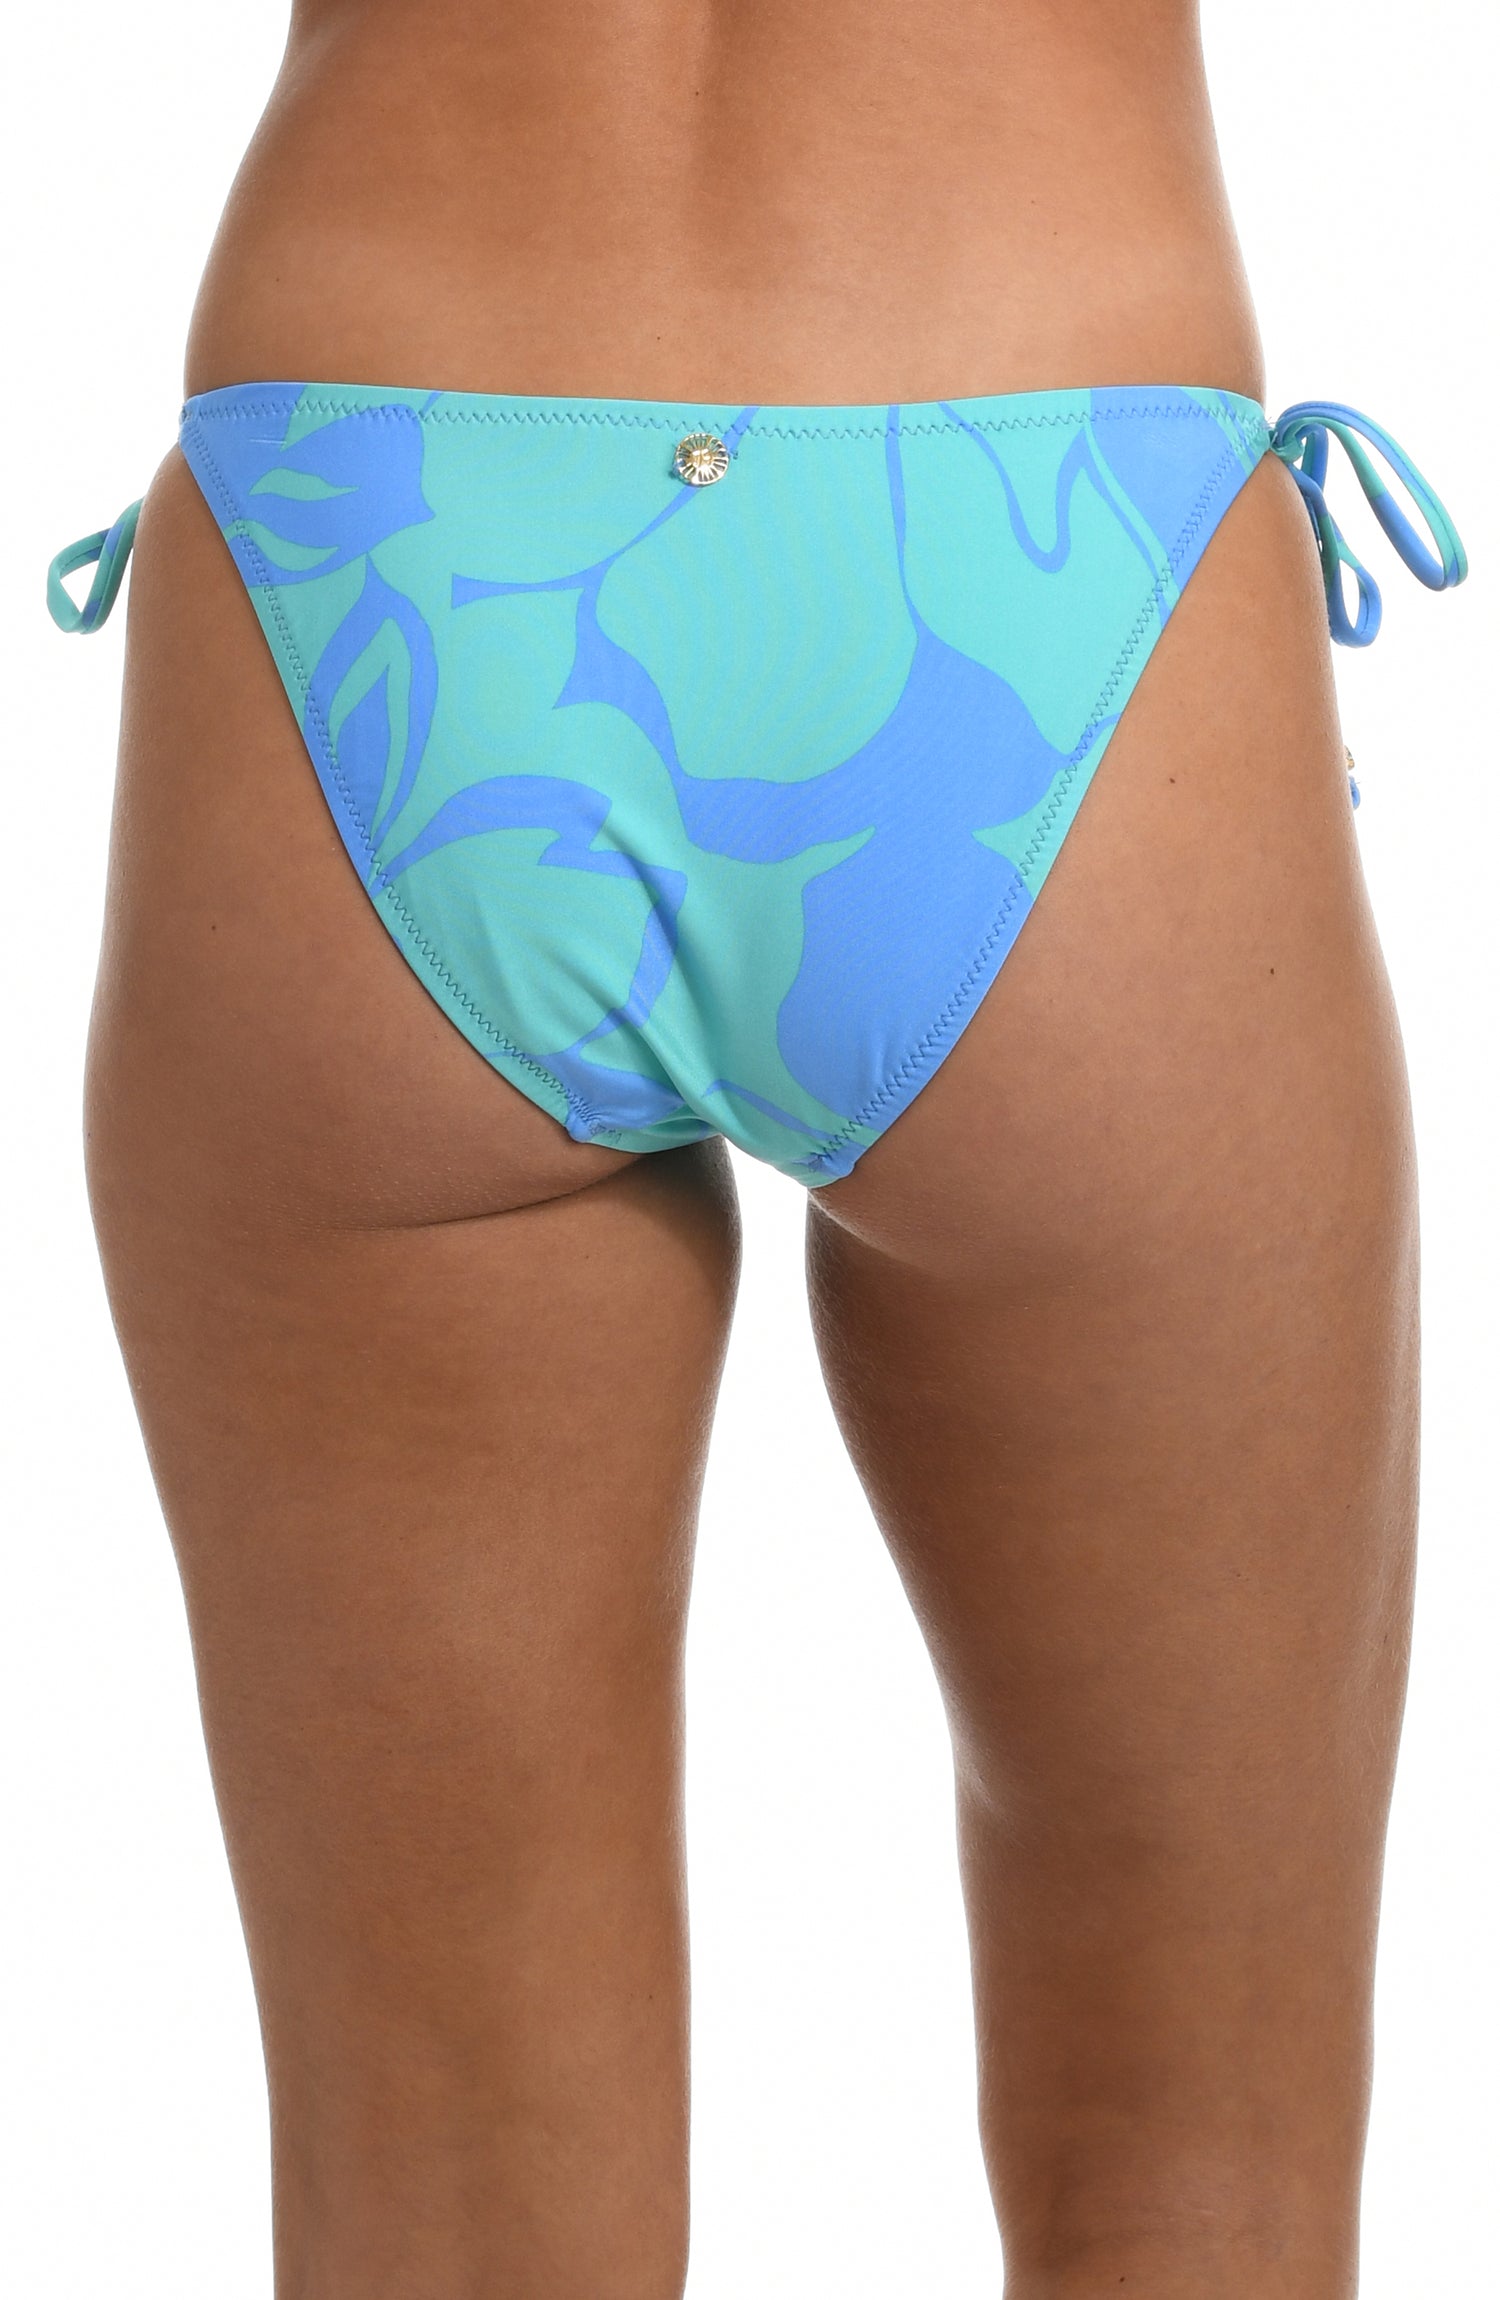 Model is wearing a sky blue and seafoam green multicolored tropical printed side tie hipster swimsuit bottom from our Fresh Blooms collection.